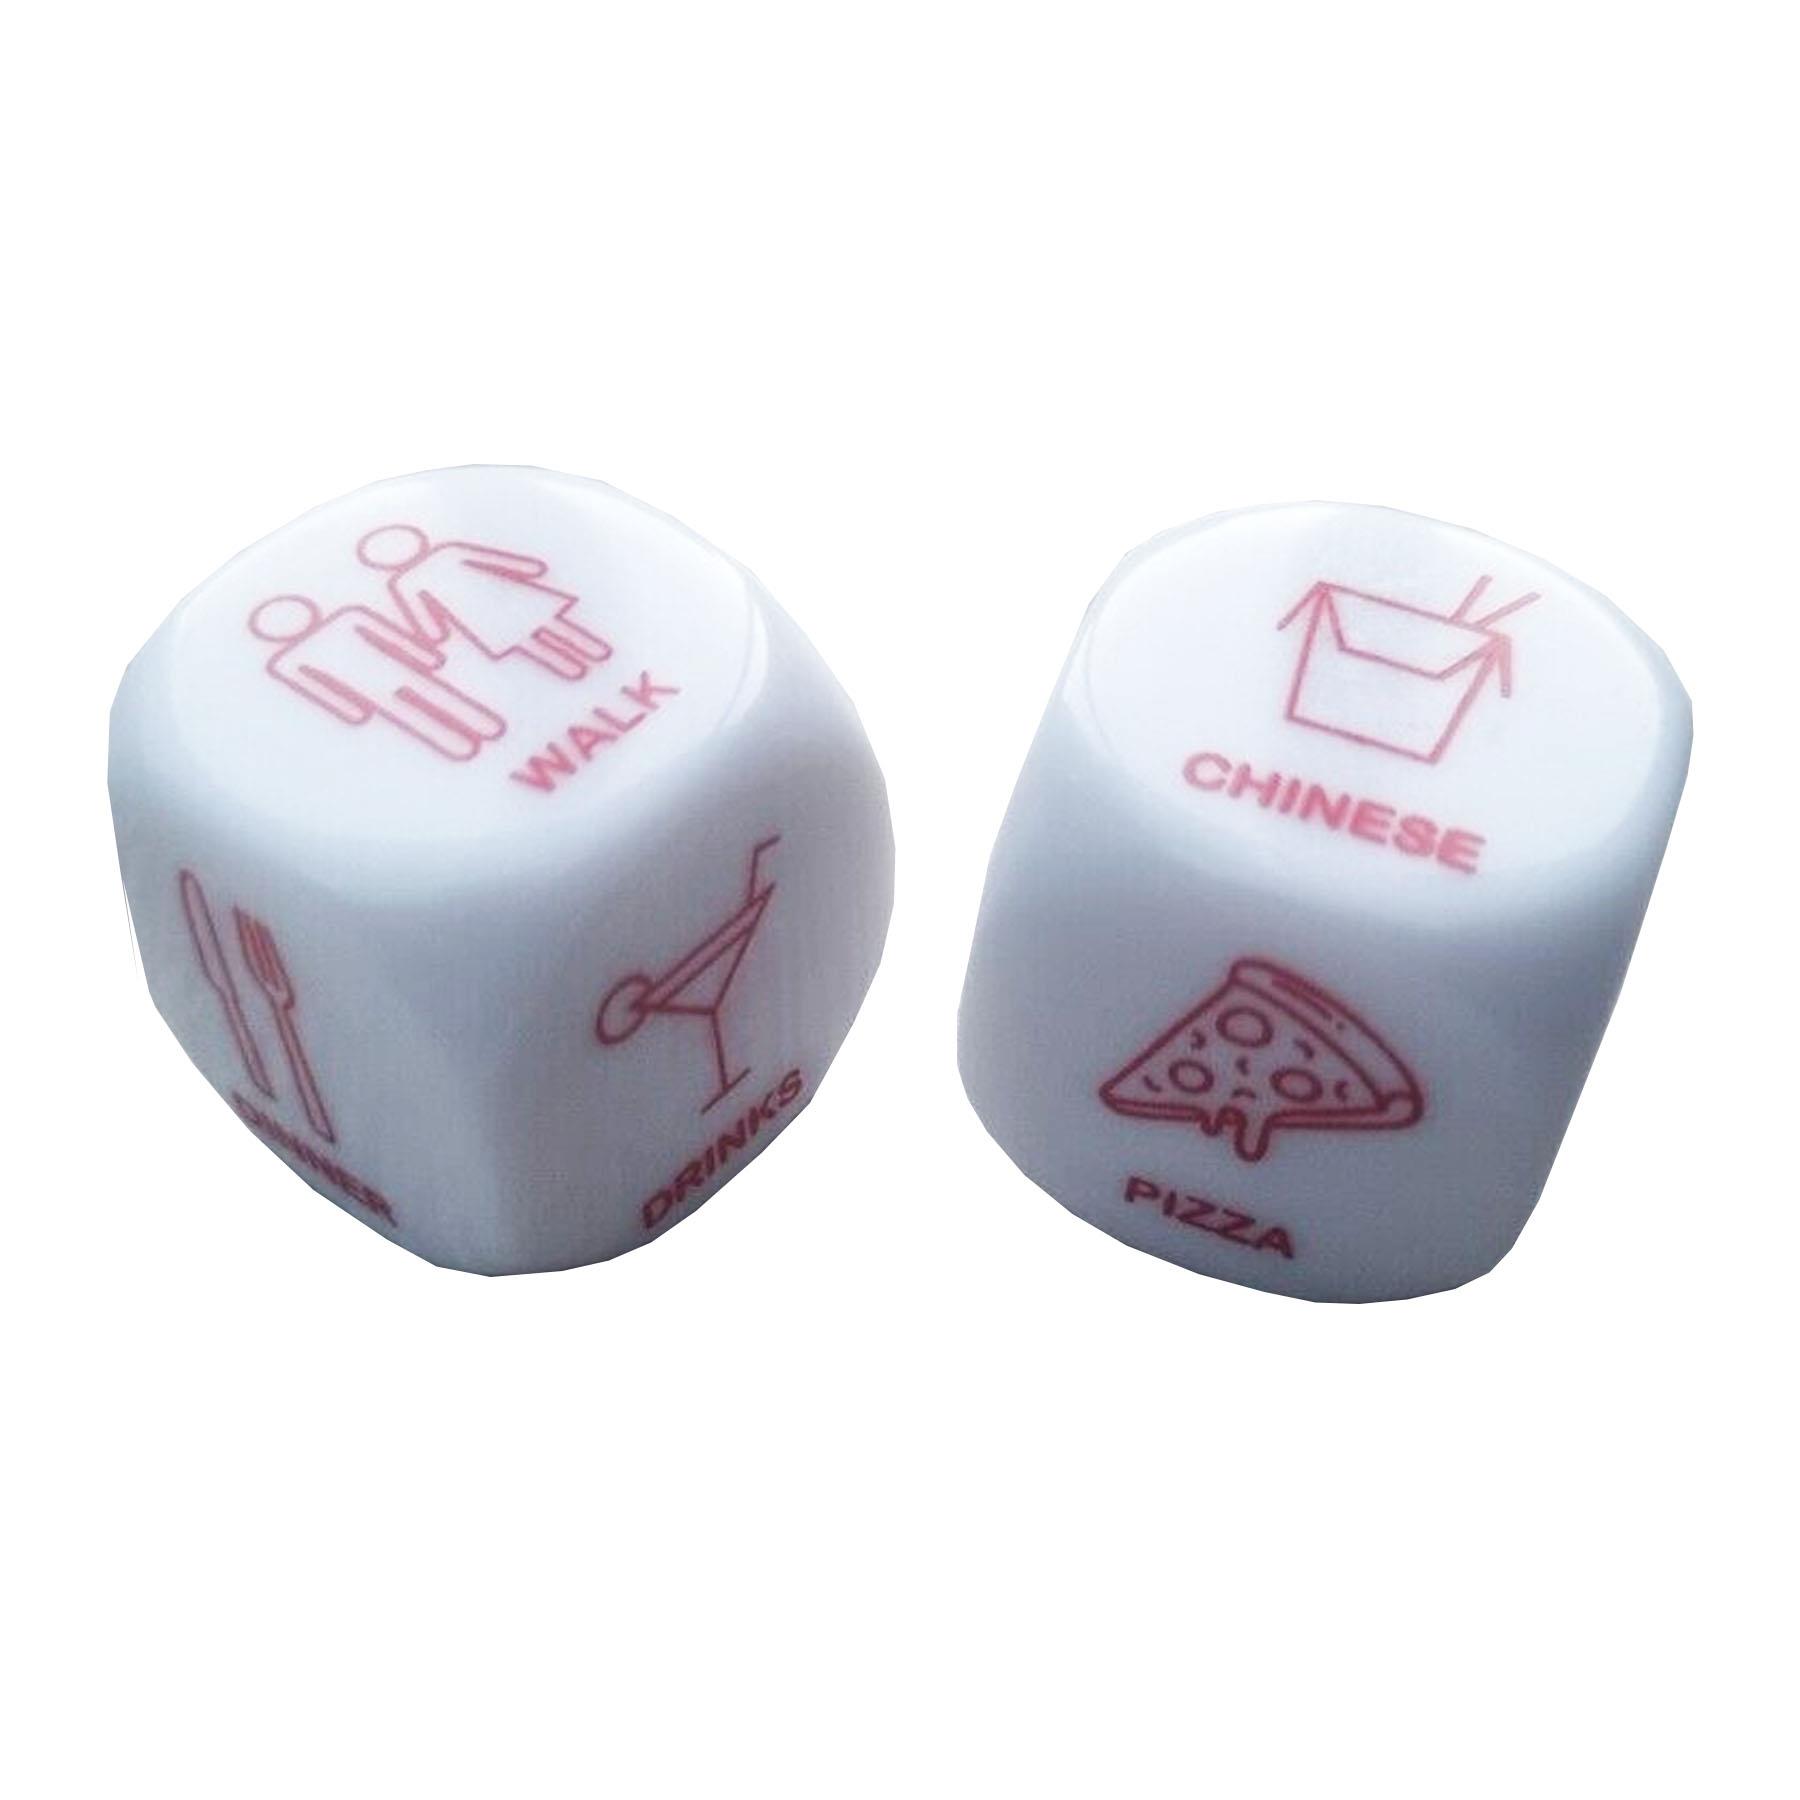 Valentines Date Deciding Dice Set of 2 Spontaneous Activity and Food Choices